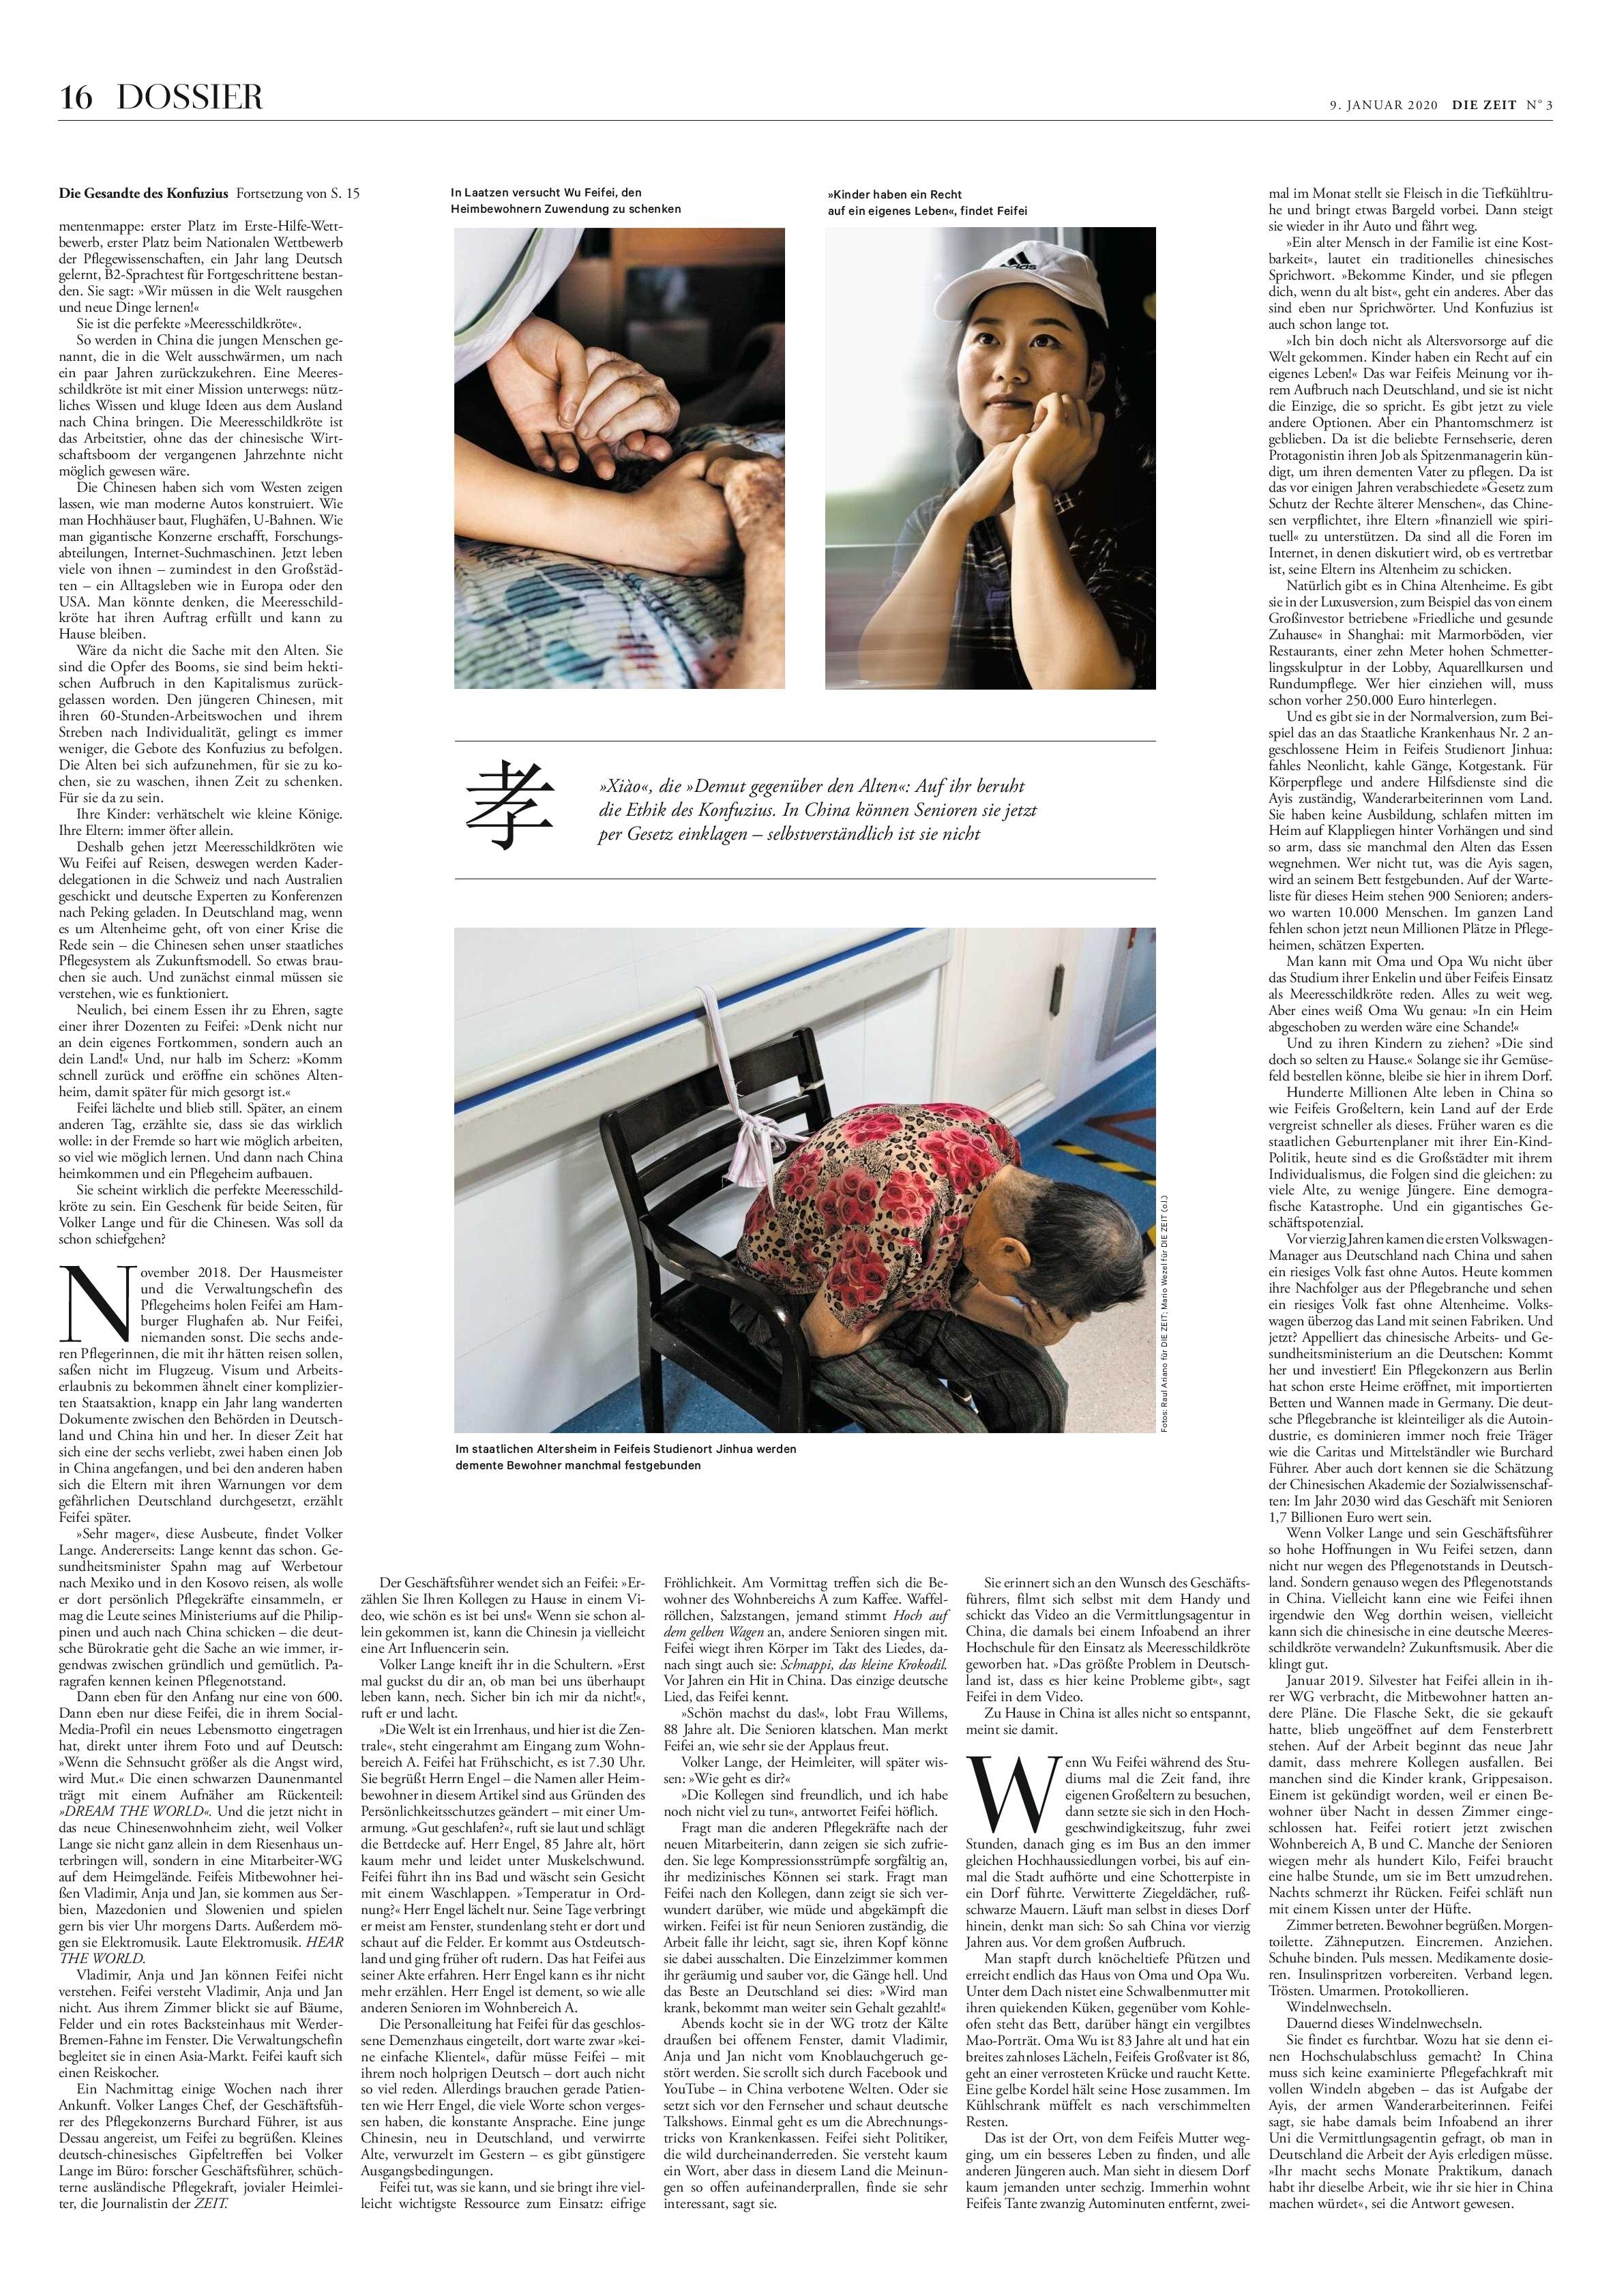 Assignment photographed for Die Zeit